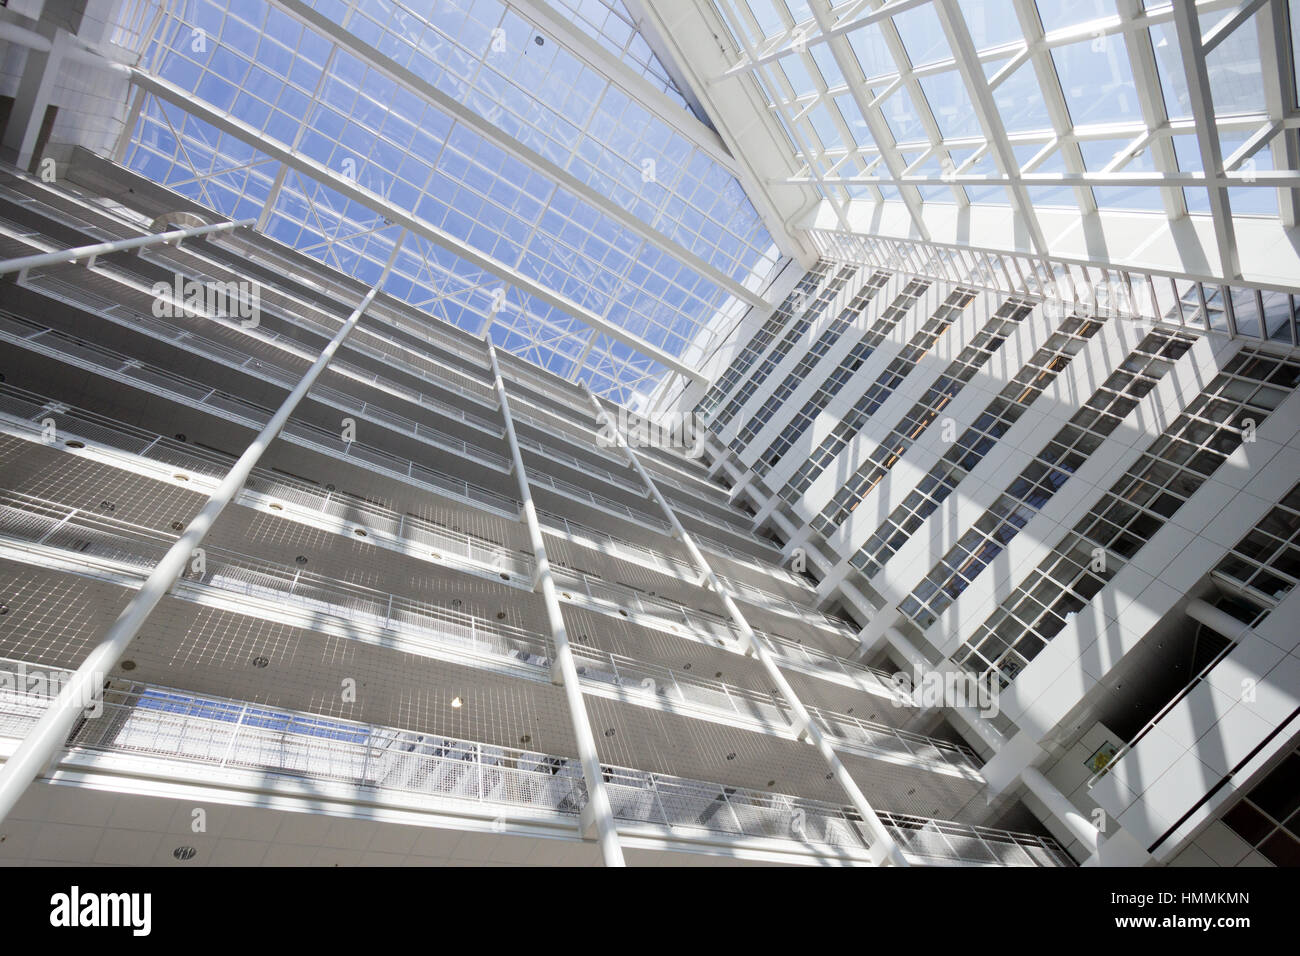 THE HAGUE - JULY 18: Interior of The Hague City Hall. Designed by R. Meier and build in 1995. 4,500 sq. meter atrium flanked by two 10- and 12-storey  Stock Photo